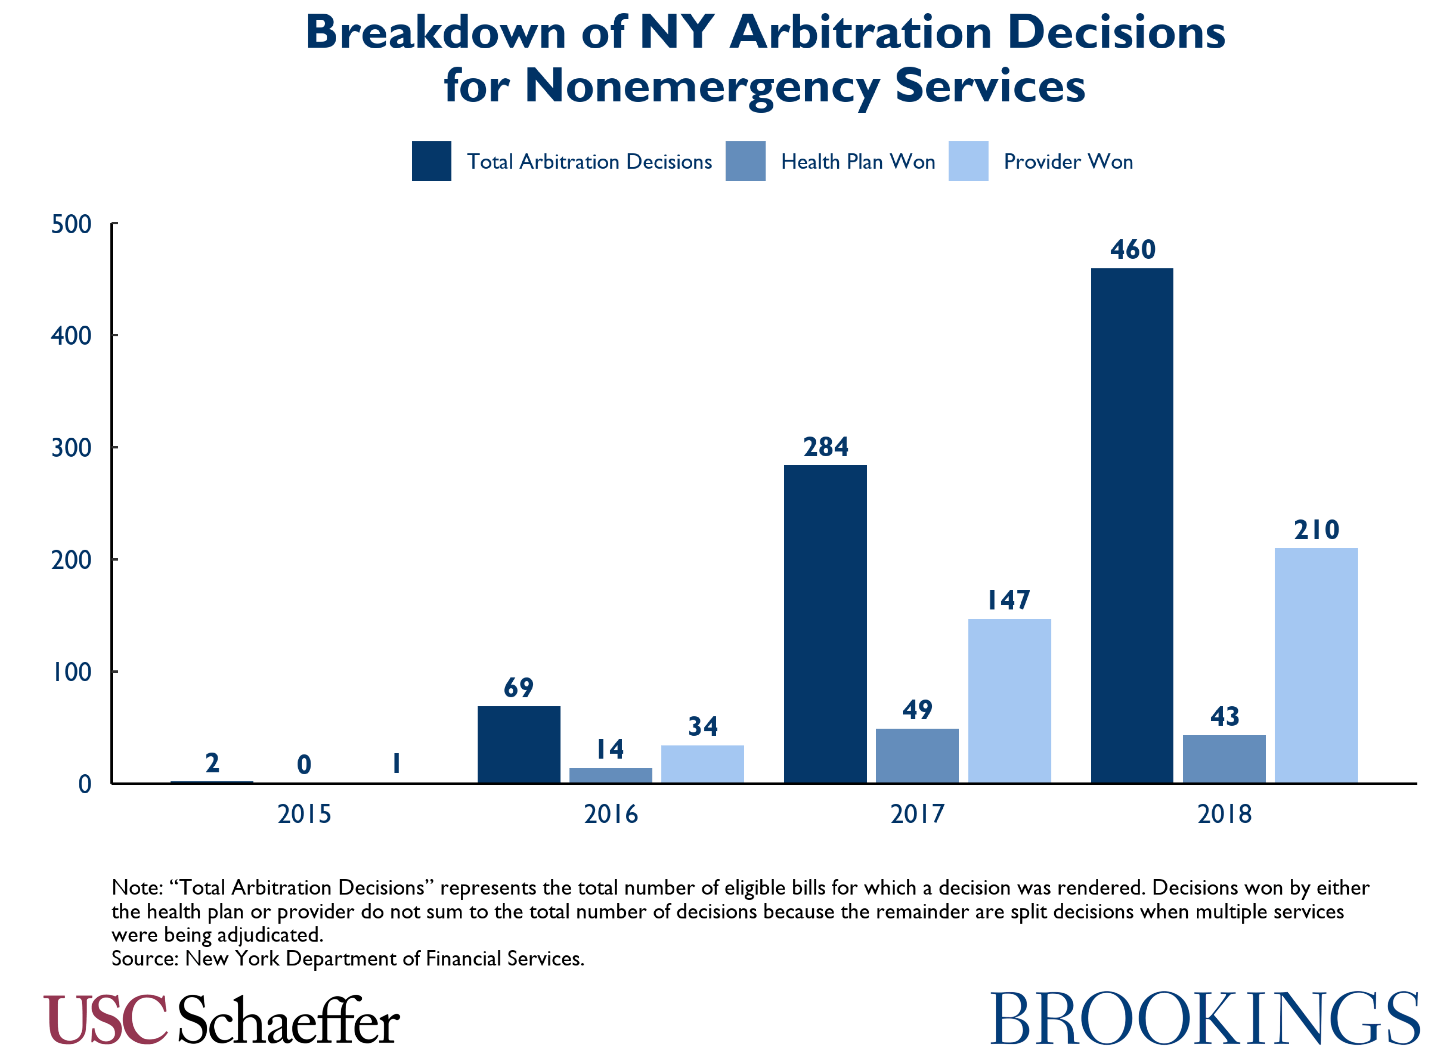 Breakdown of NY arbitration decisions for nonemergency services